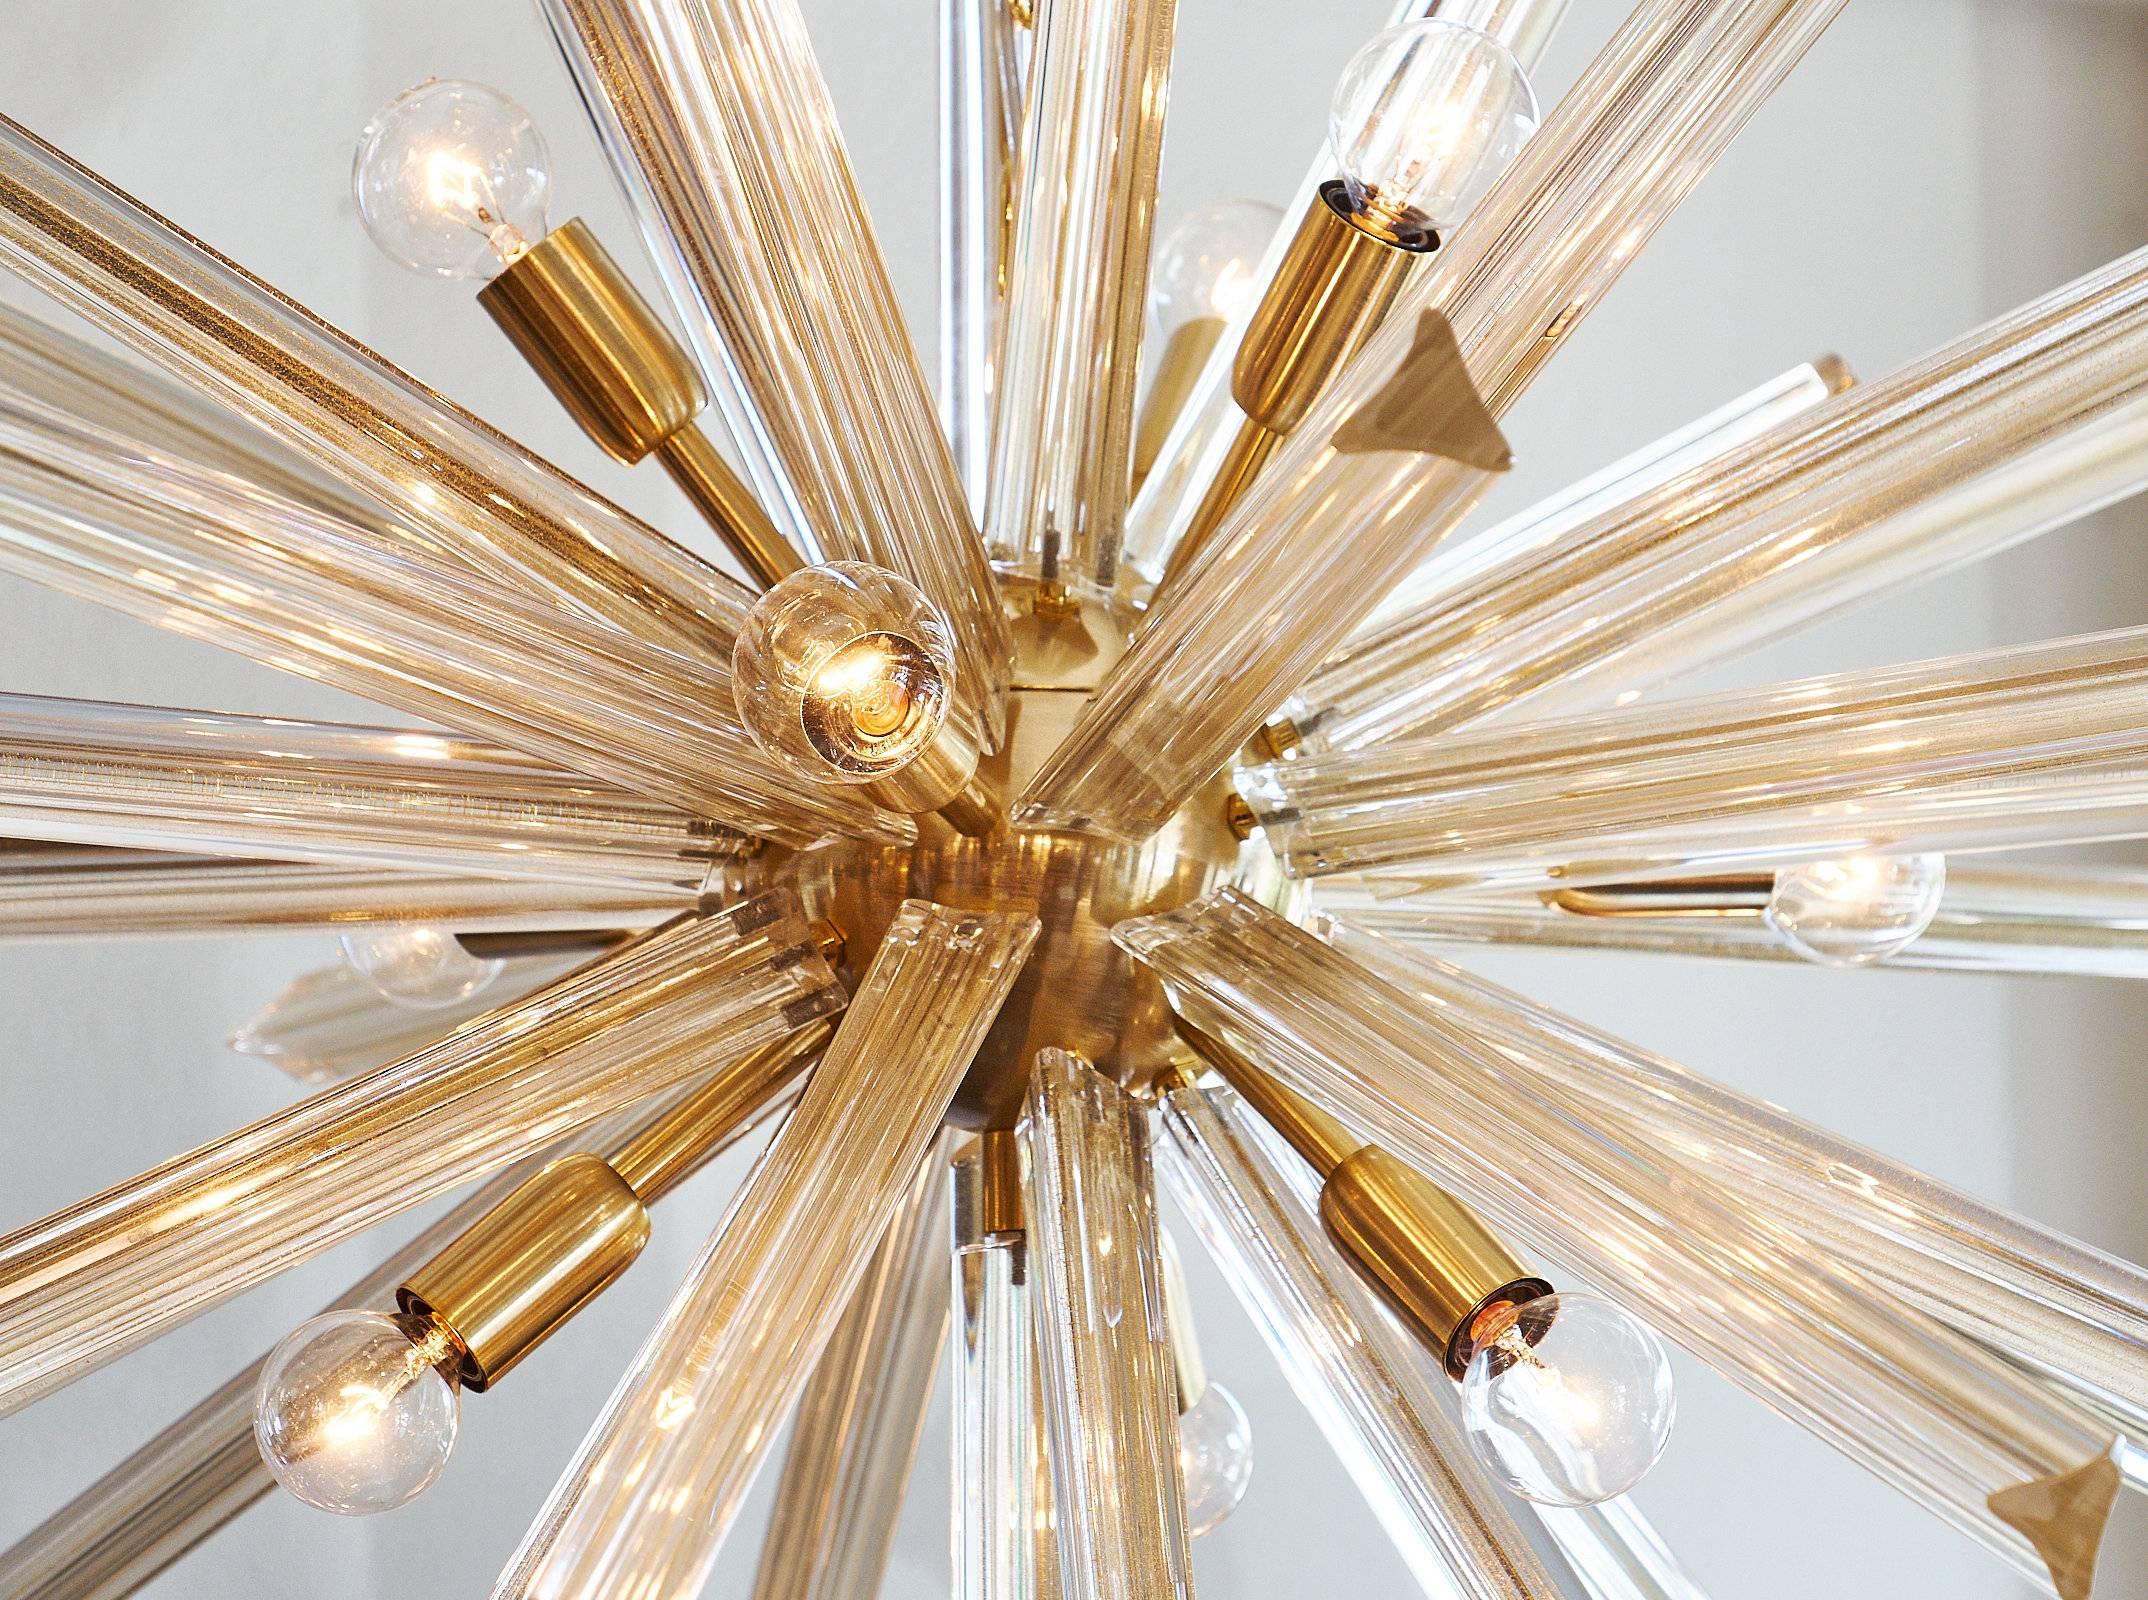 Italian Murano modernist chandelier of over 40 “Triedi” avventurina stems fused with 23-karat gold flecks. The stems shoot out from a brushed gold steel sphere to form this dynamic and eye-catching fixture. This piece has been rewired for the US